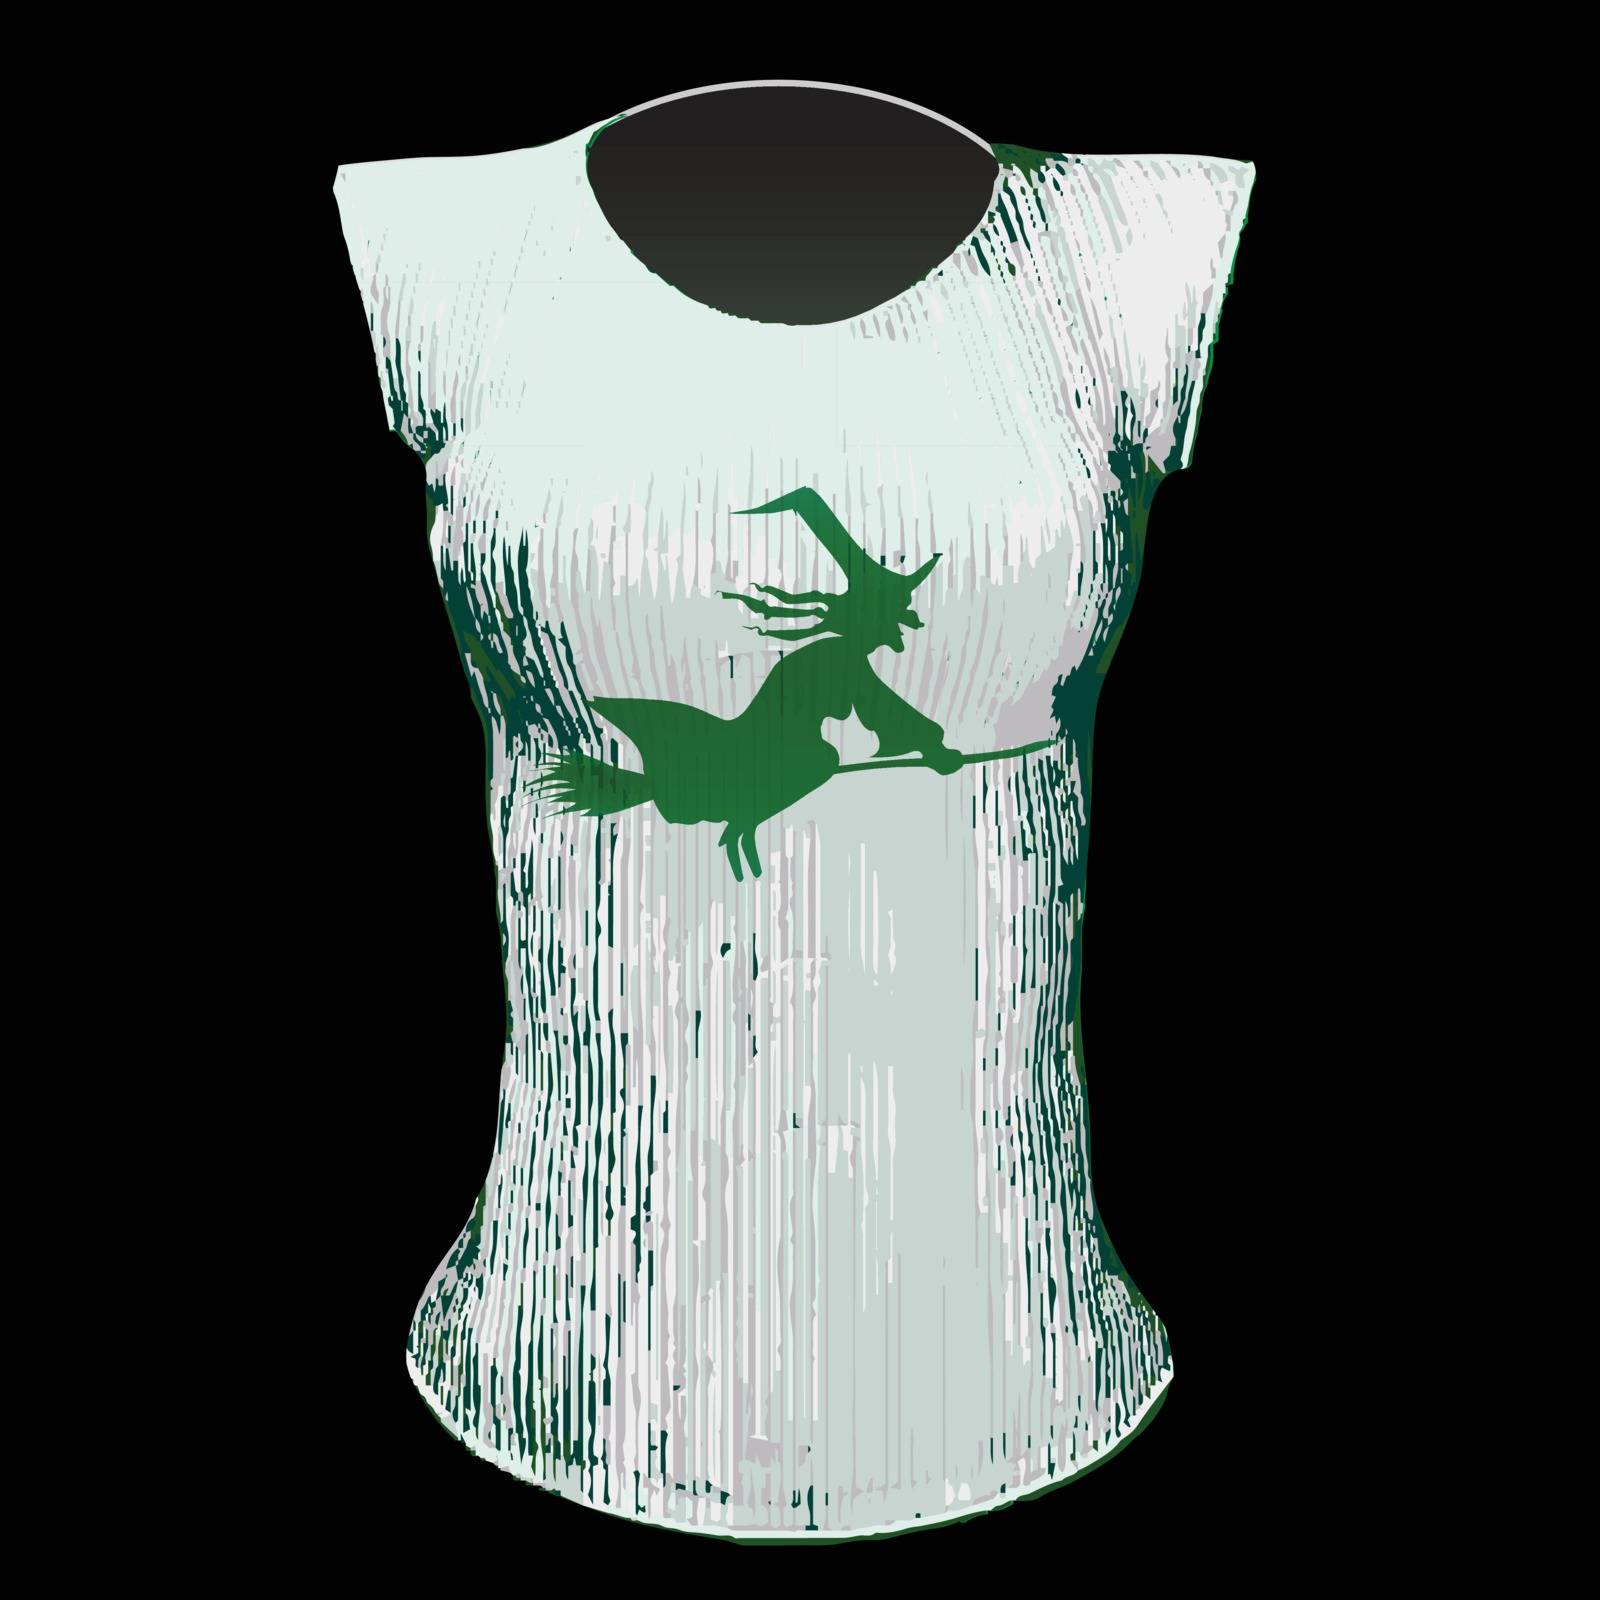 A flying witch on her broomstick as a T shirt design